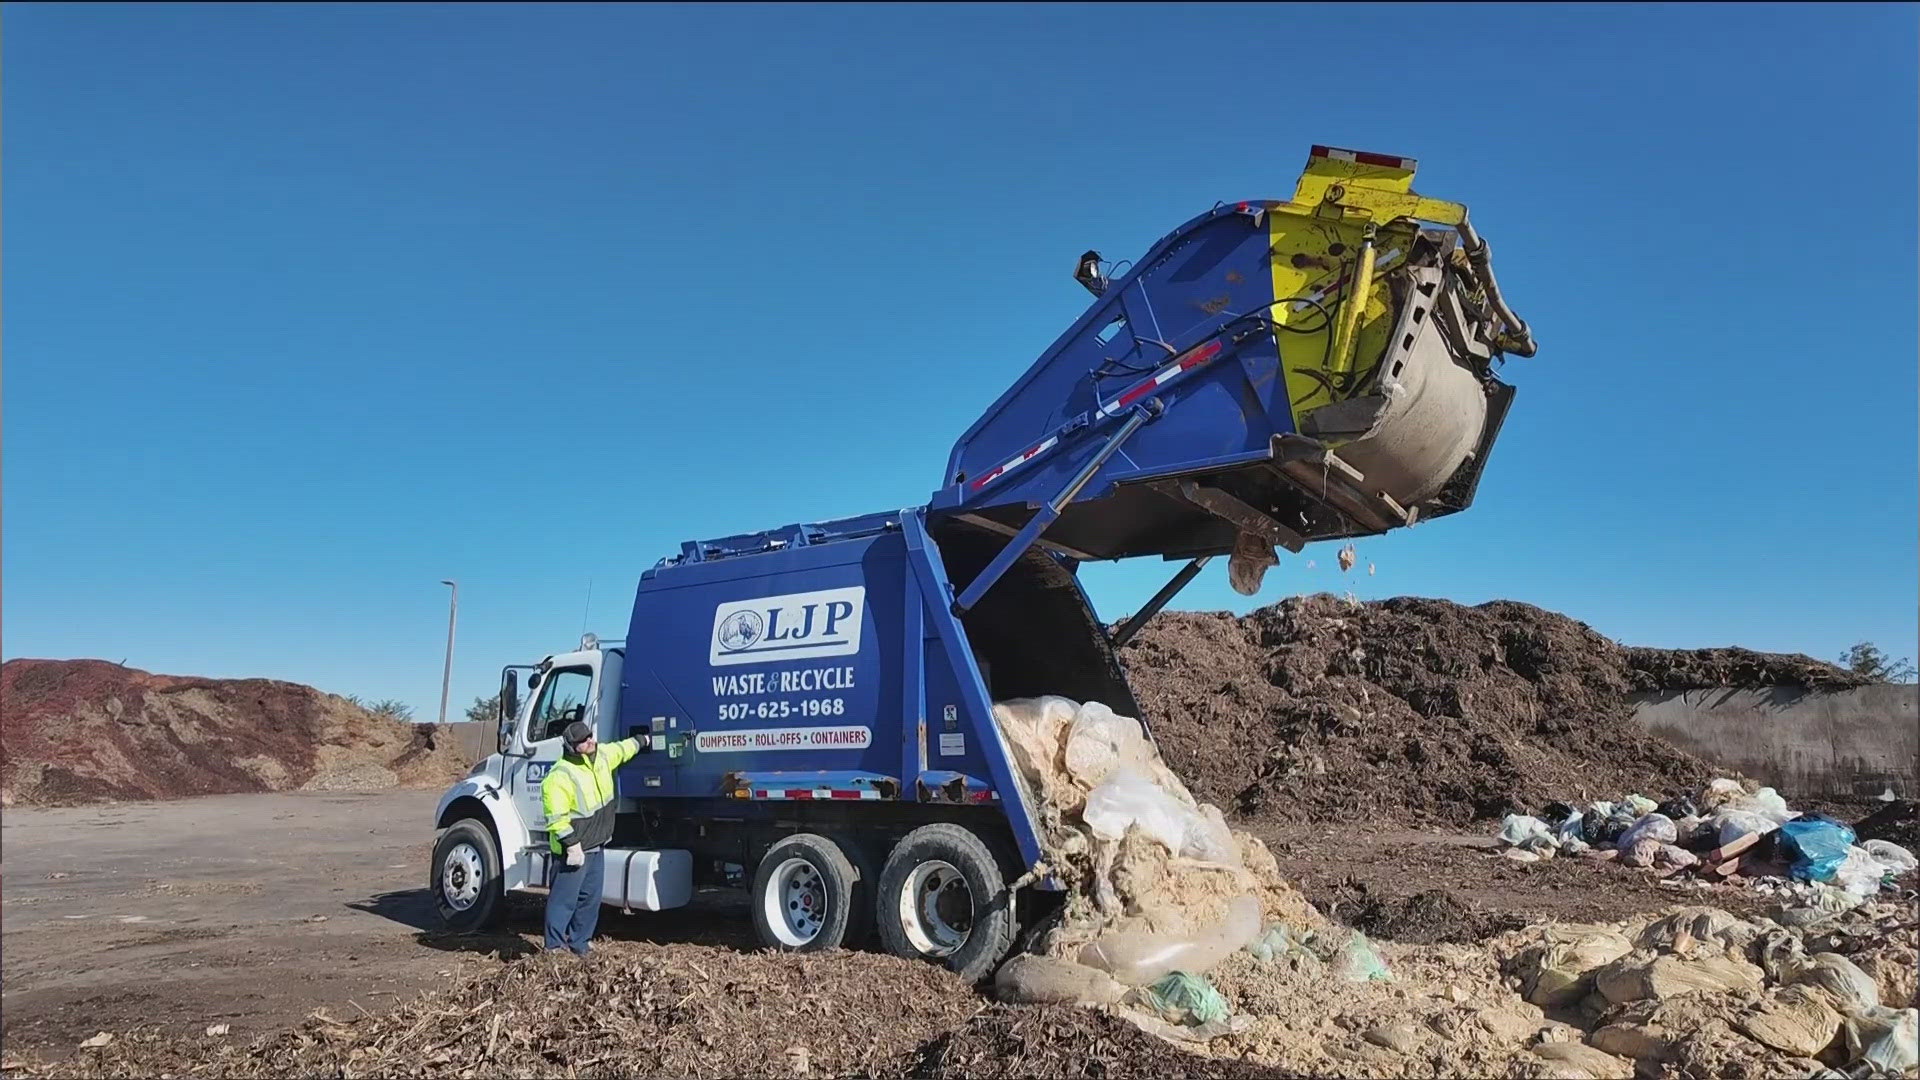 An expert says that a third of trash materials are compostable, and if residents composted their food scraps, the county could get closer to its recycling goals.